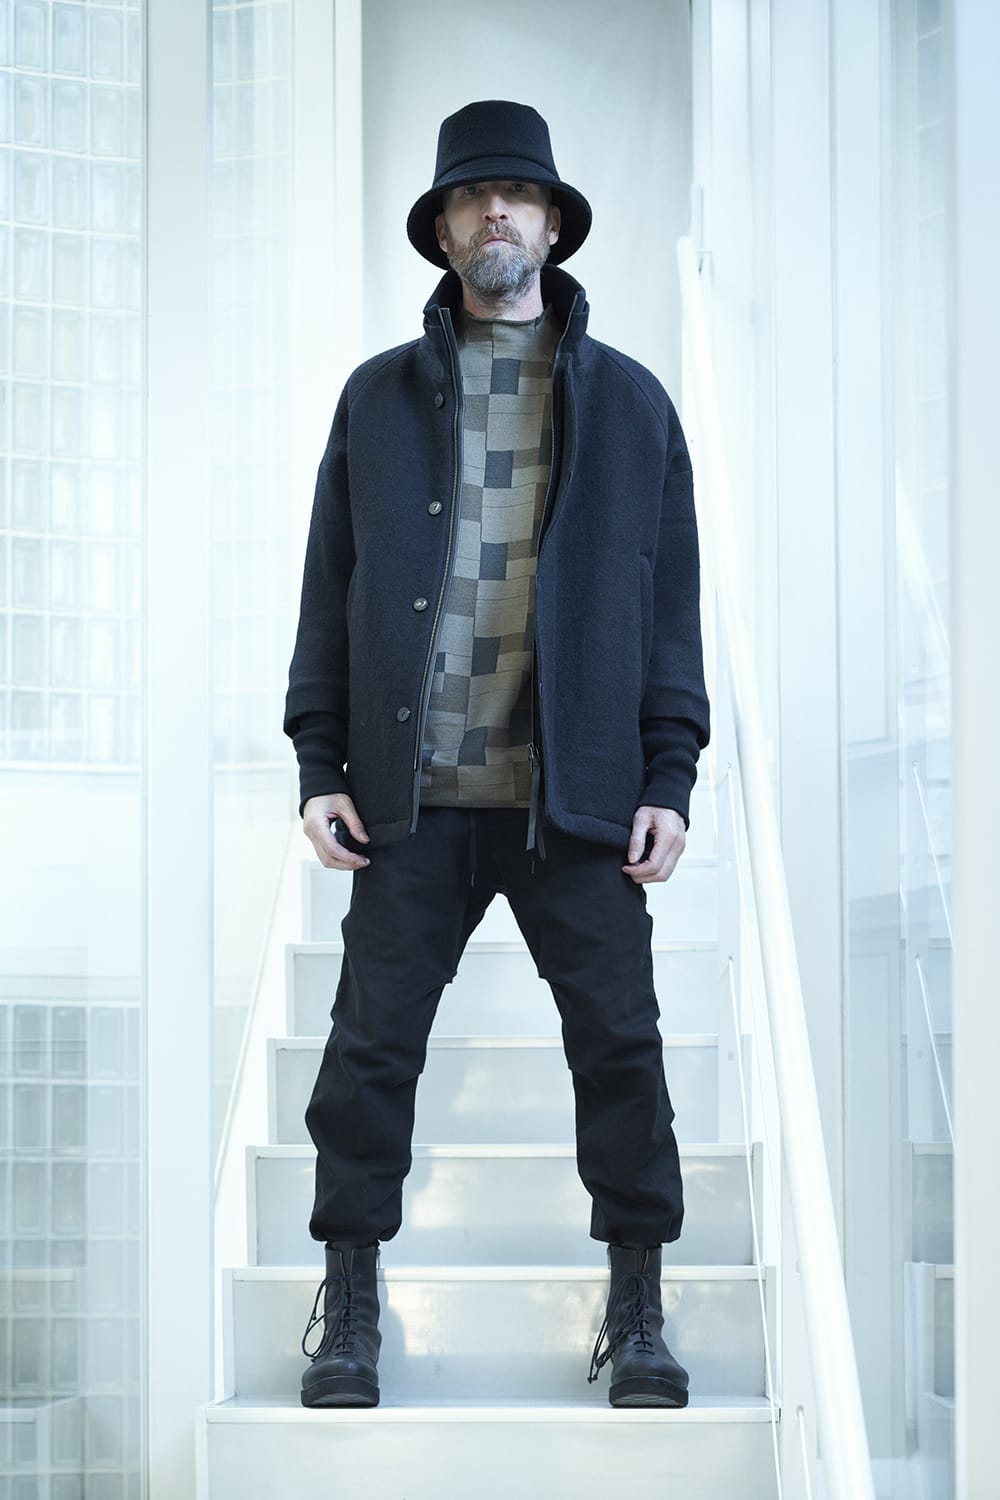 Arrival Information] The new DEVOA 22-23 AW collection is 